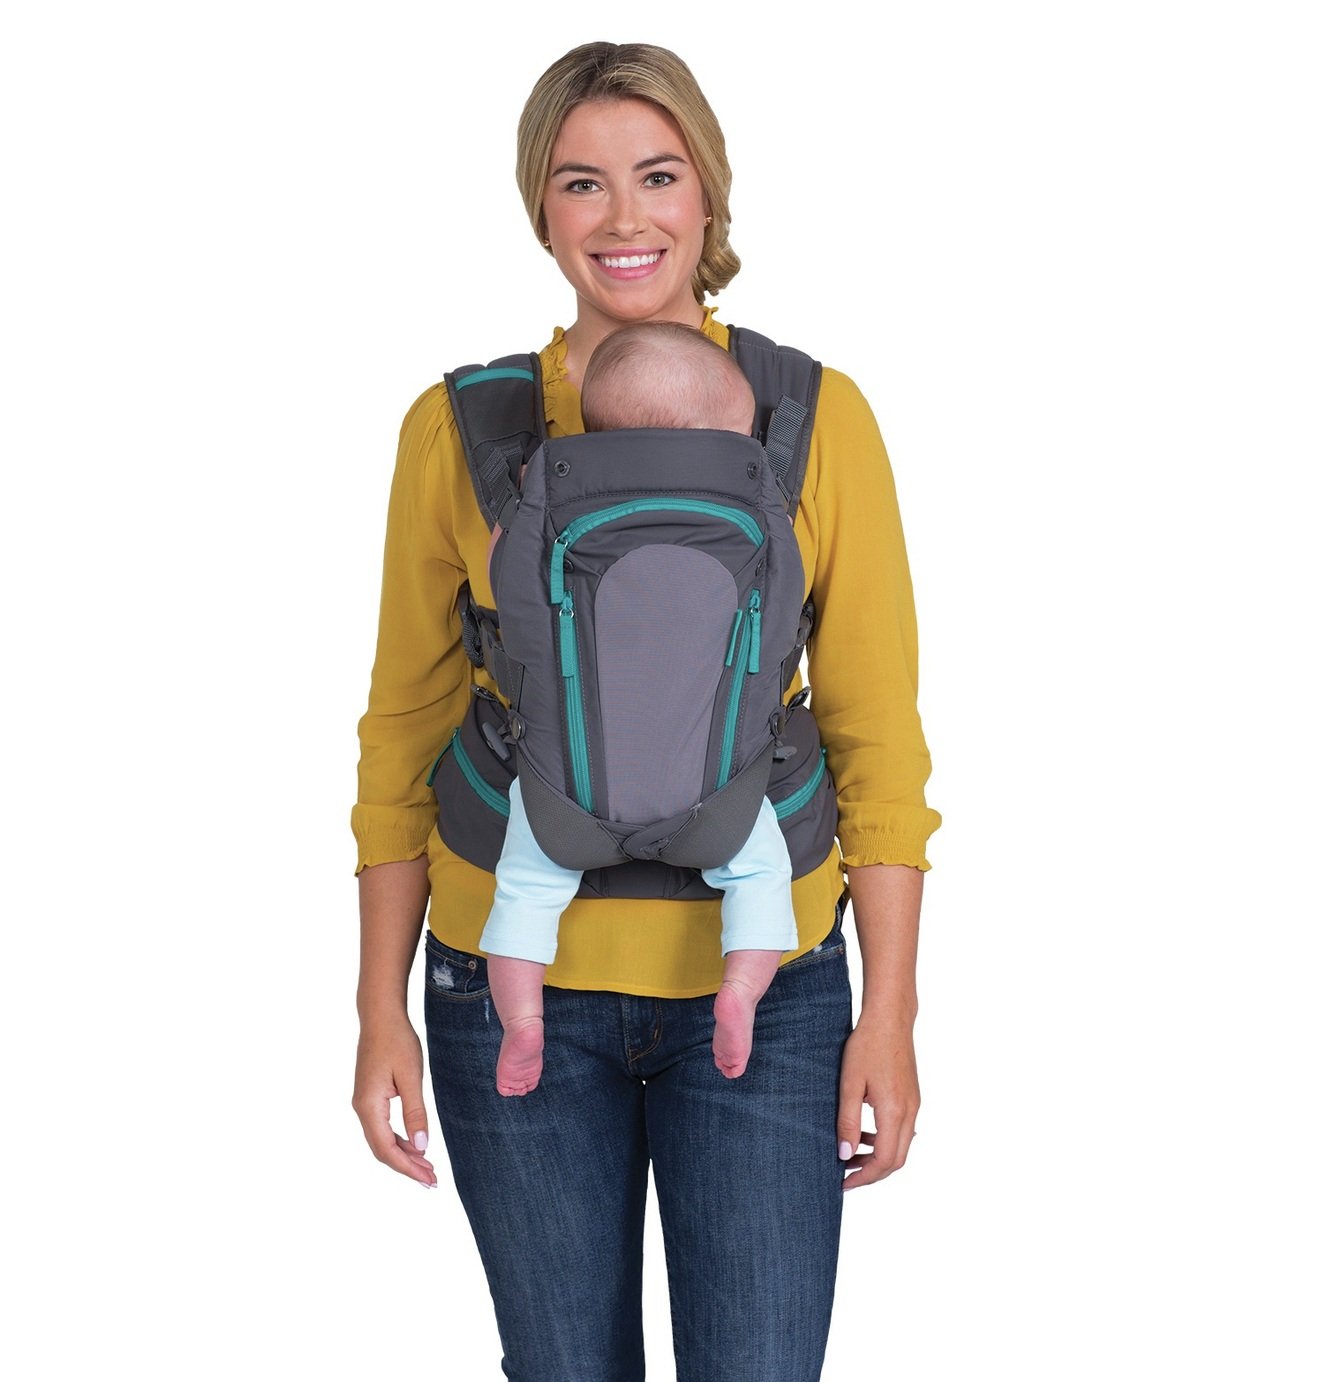 Infantino Carry On Multi Pocket Baby Carrier Review